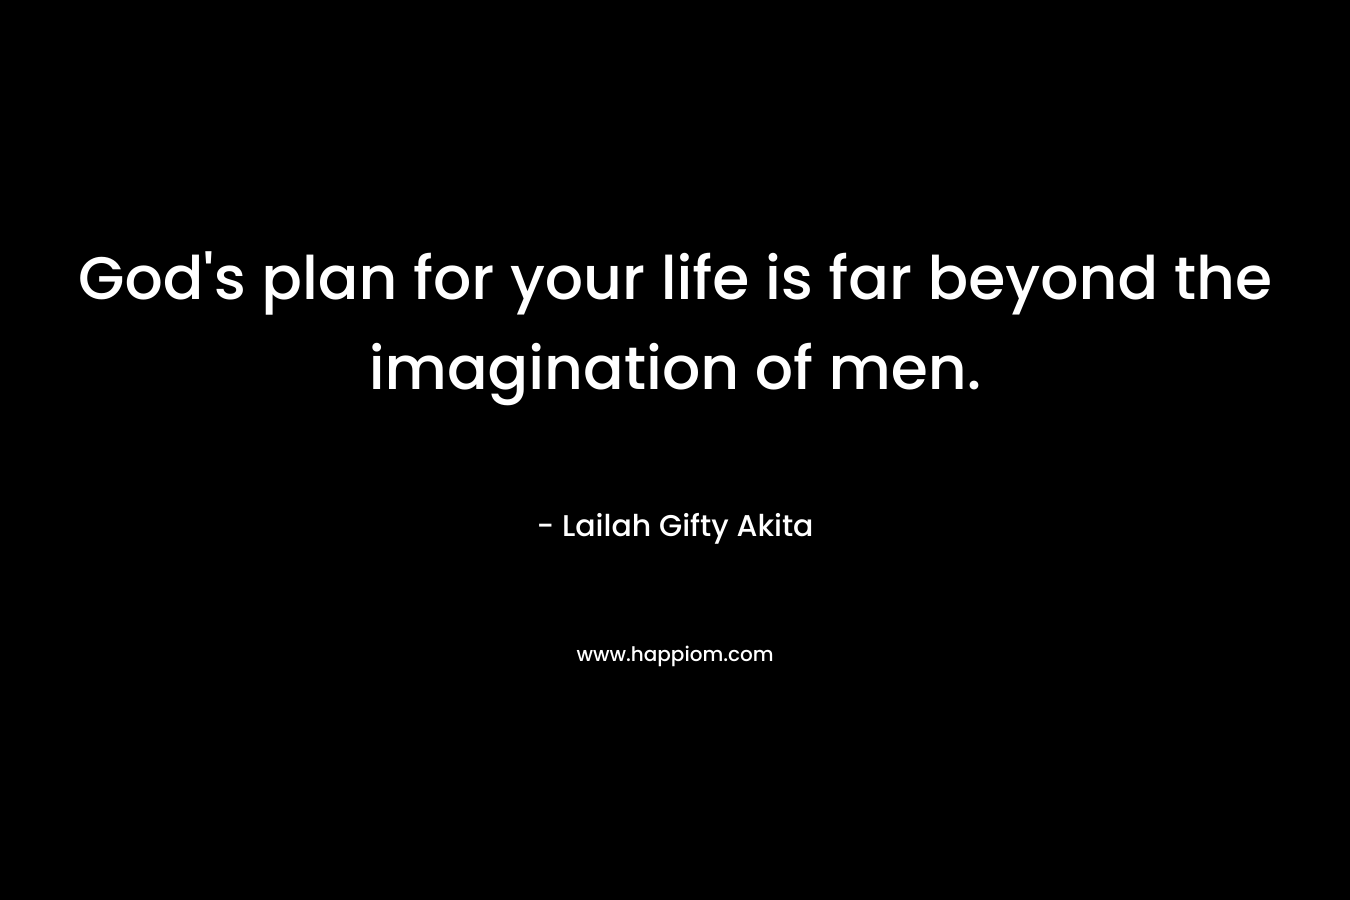 God's plan for your life is far beyond the imagination of men.